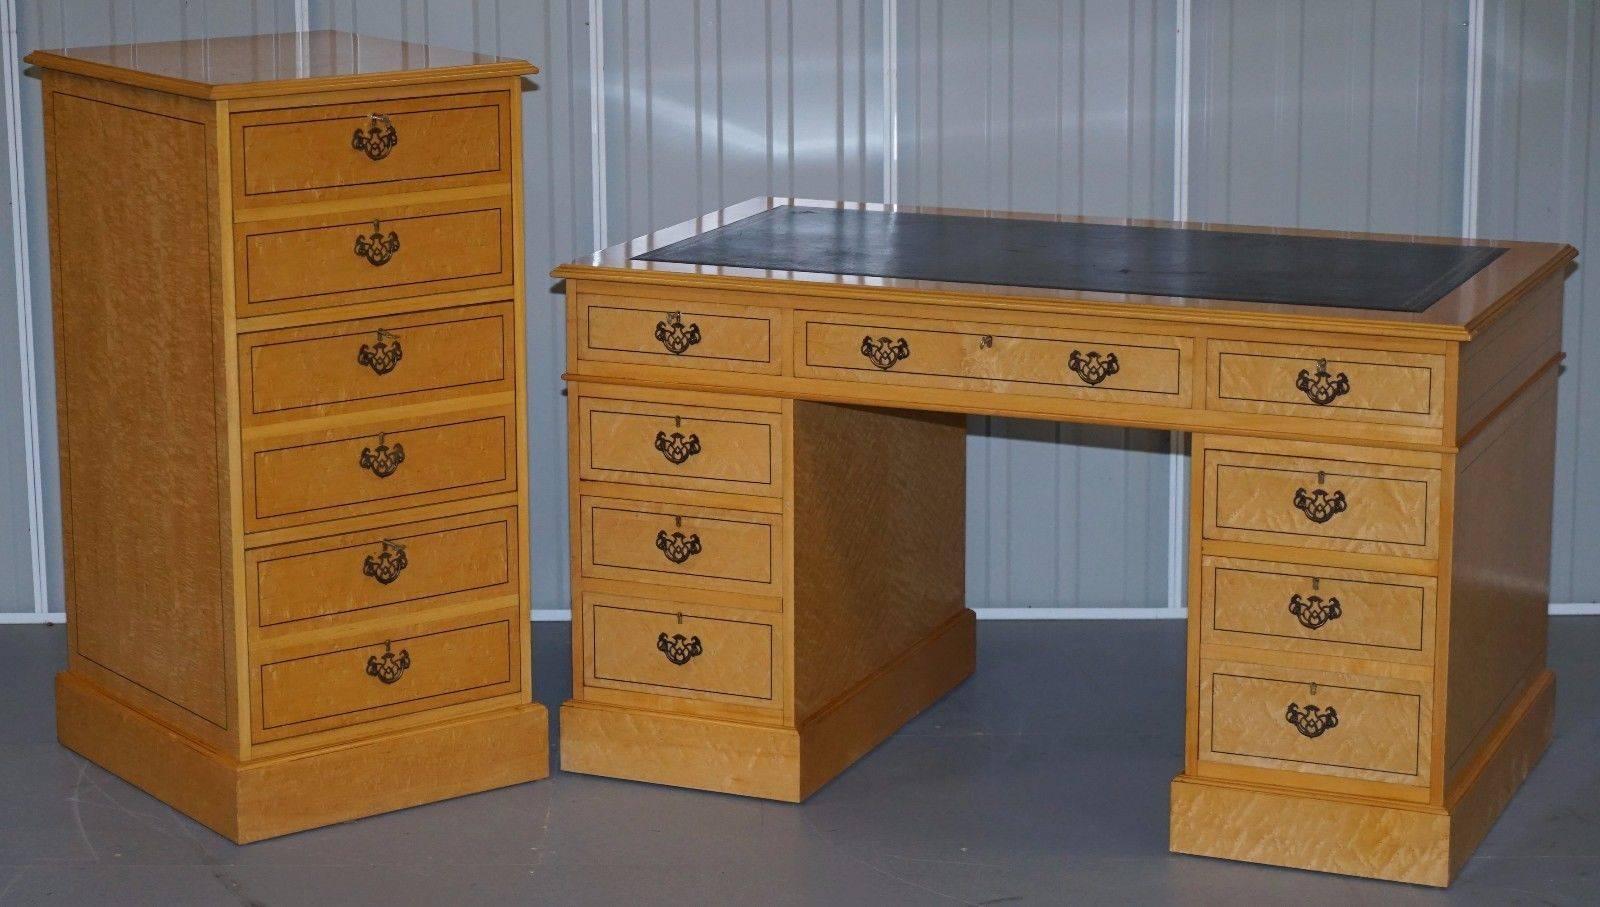 We are delighted to offer for sale this very rare and really quite stunning Birdseye Maple twin pedestal partner desk

Please note the delivery fee listed is just a guide, for an accurate quote please send me your postcode and I’ll price it up for